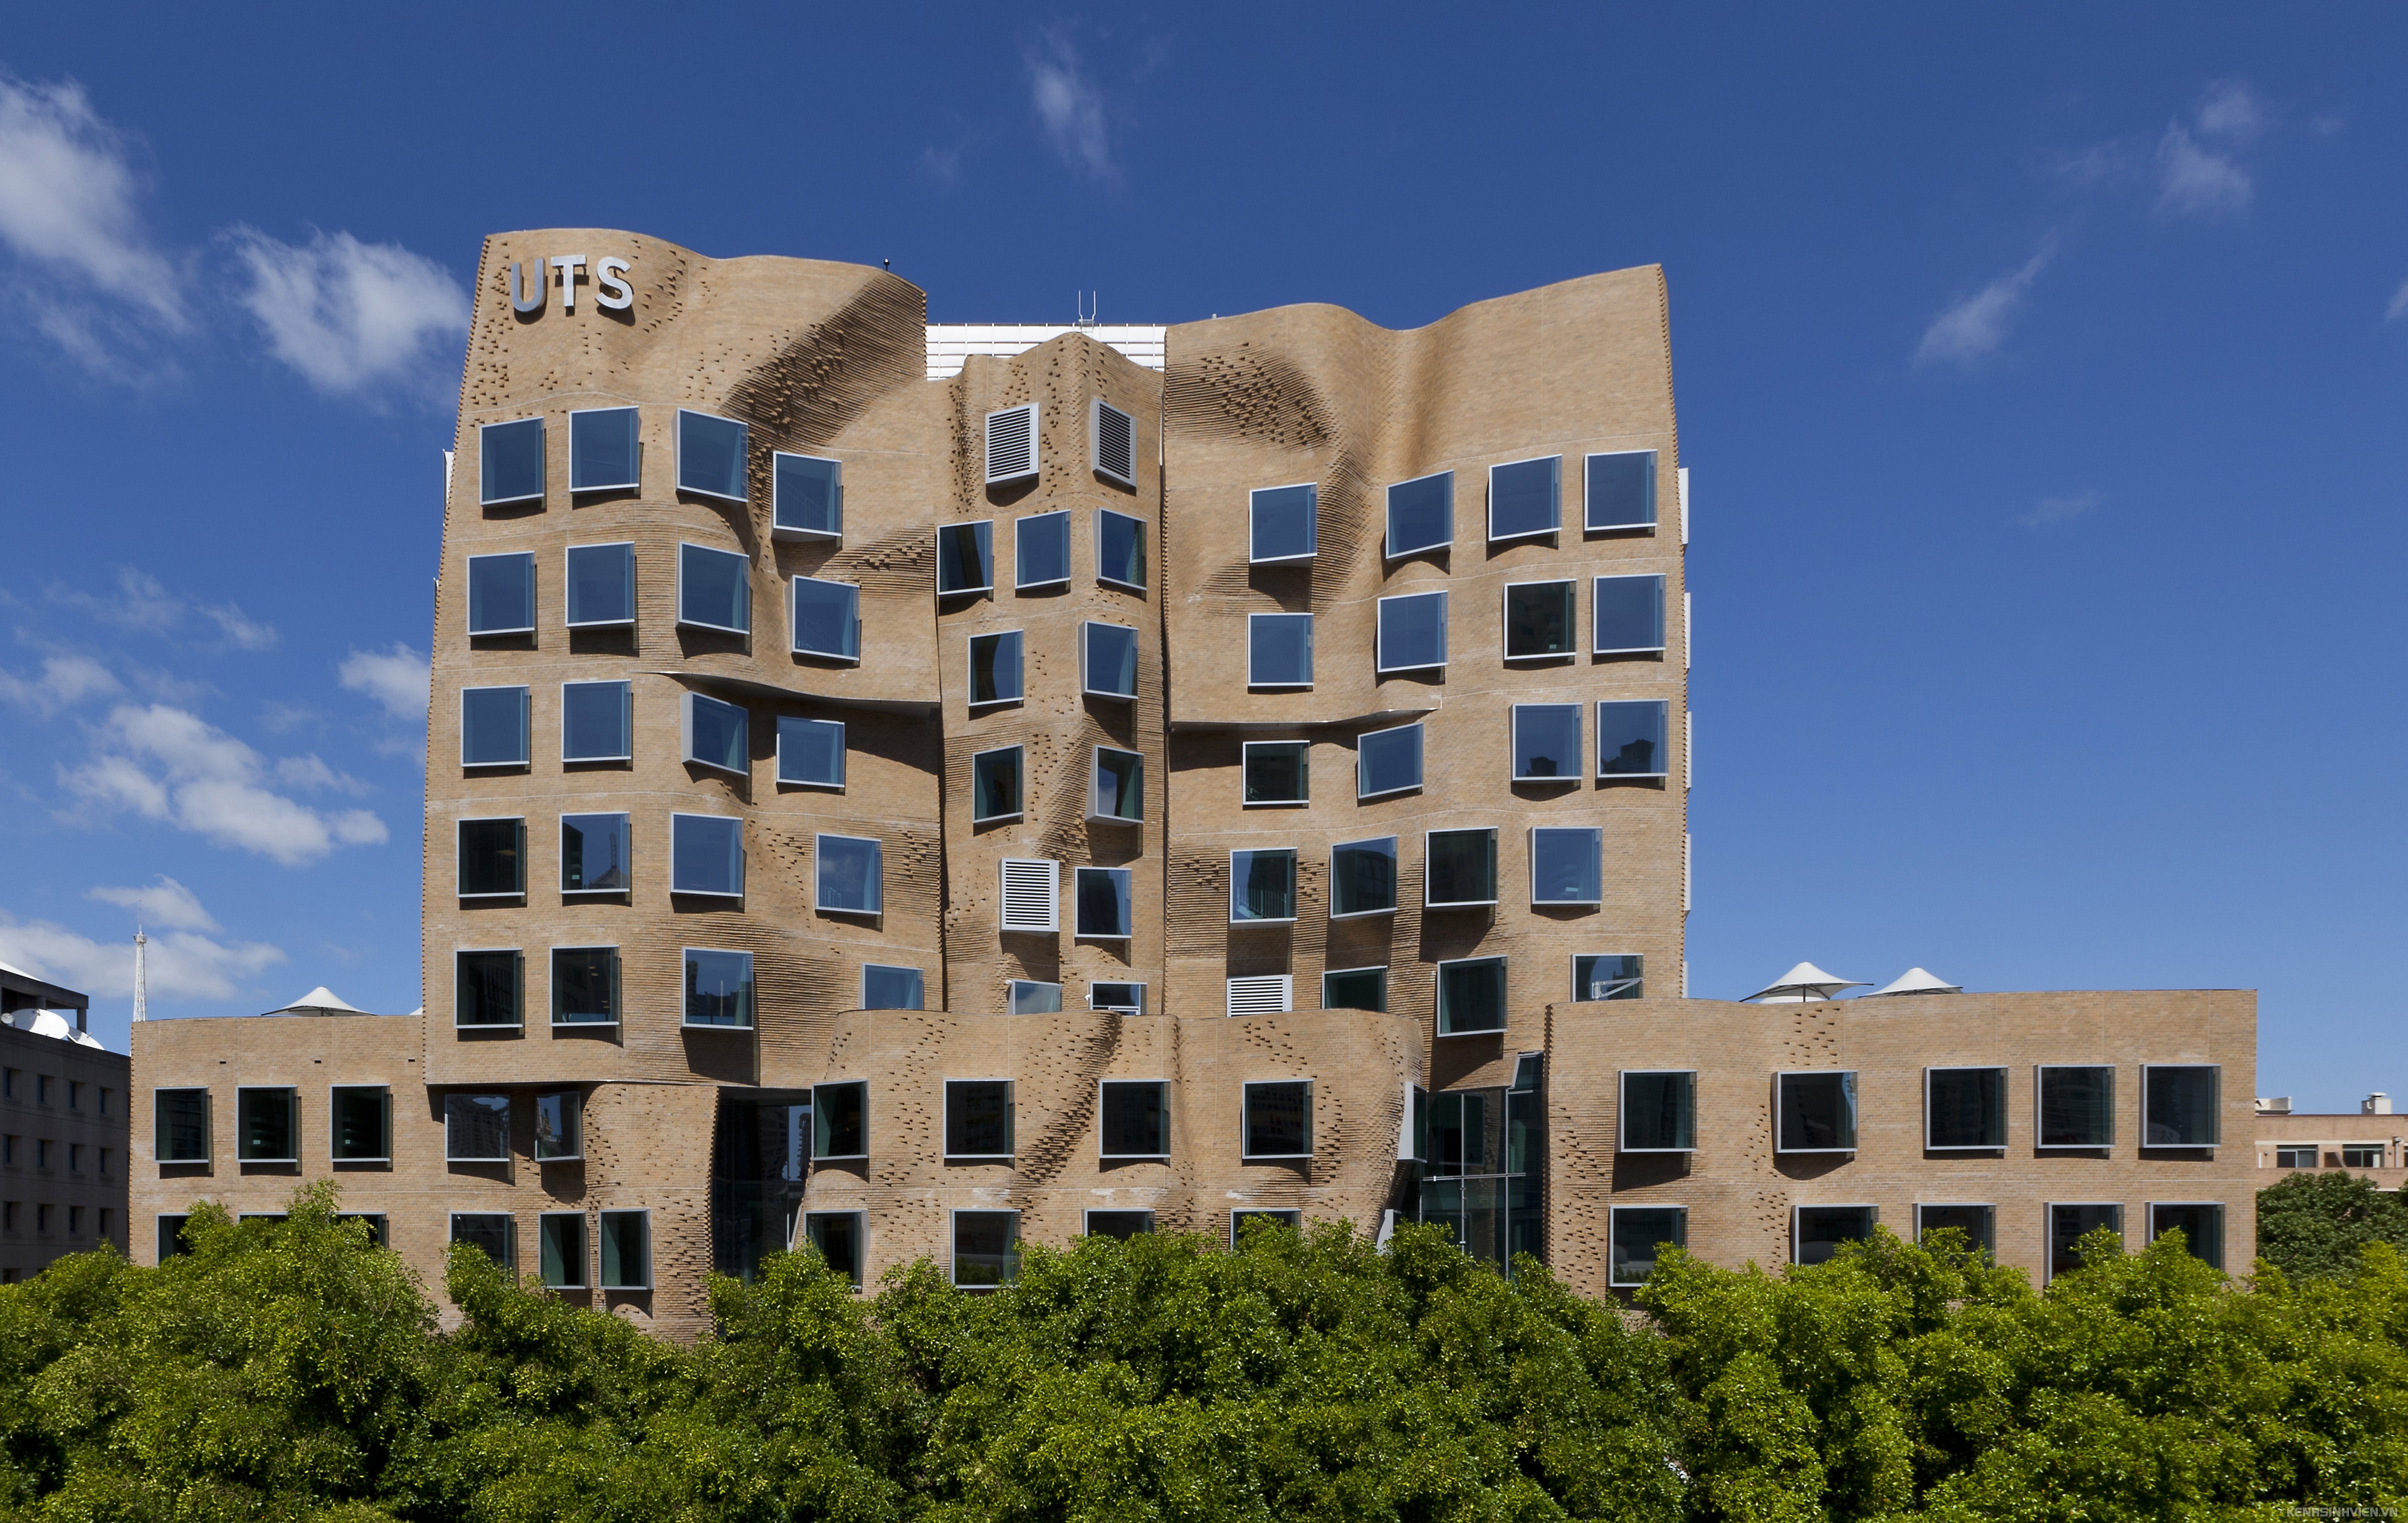 3-frank-gehry-designed-dr-chau-chak-wing-building-home-of-the-uts-business-school-credit-andrew-worssam-1.jpg